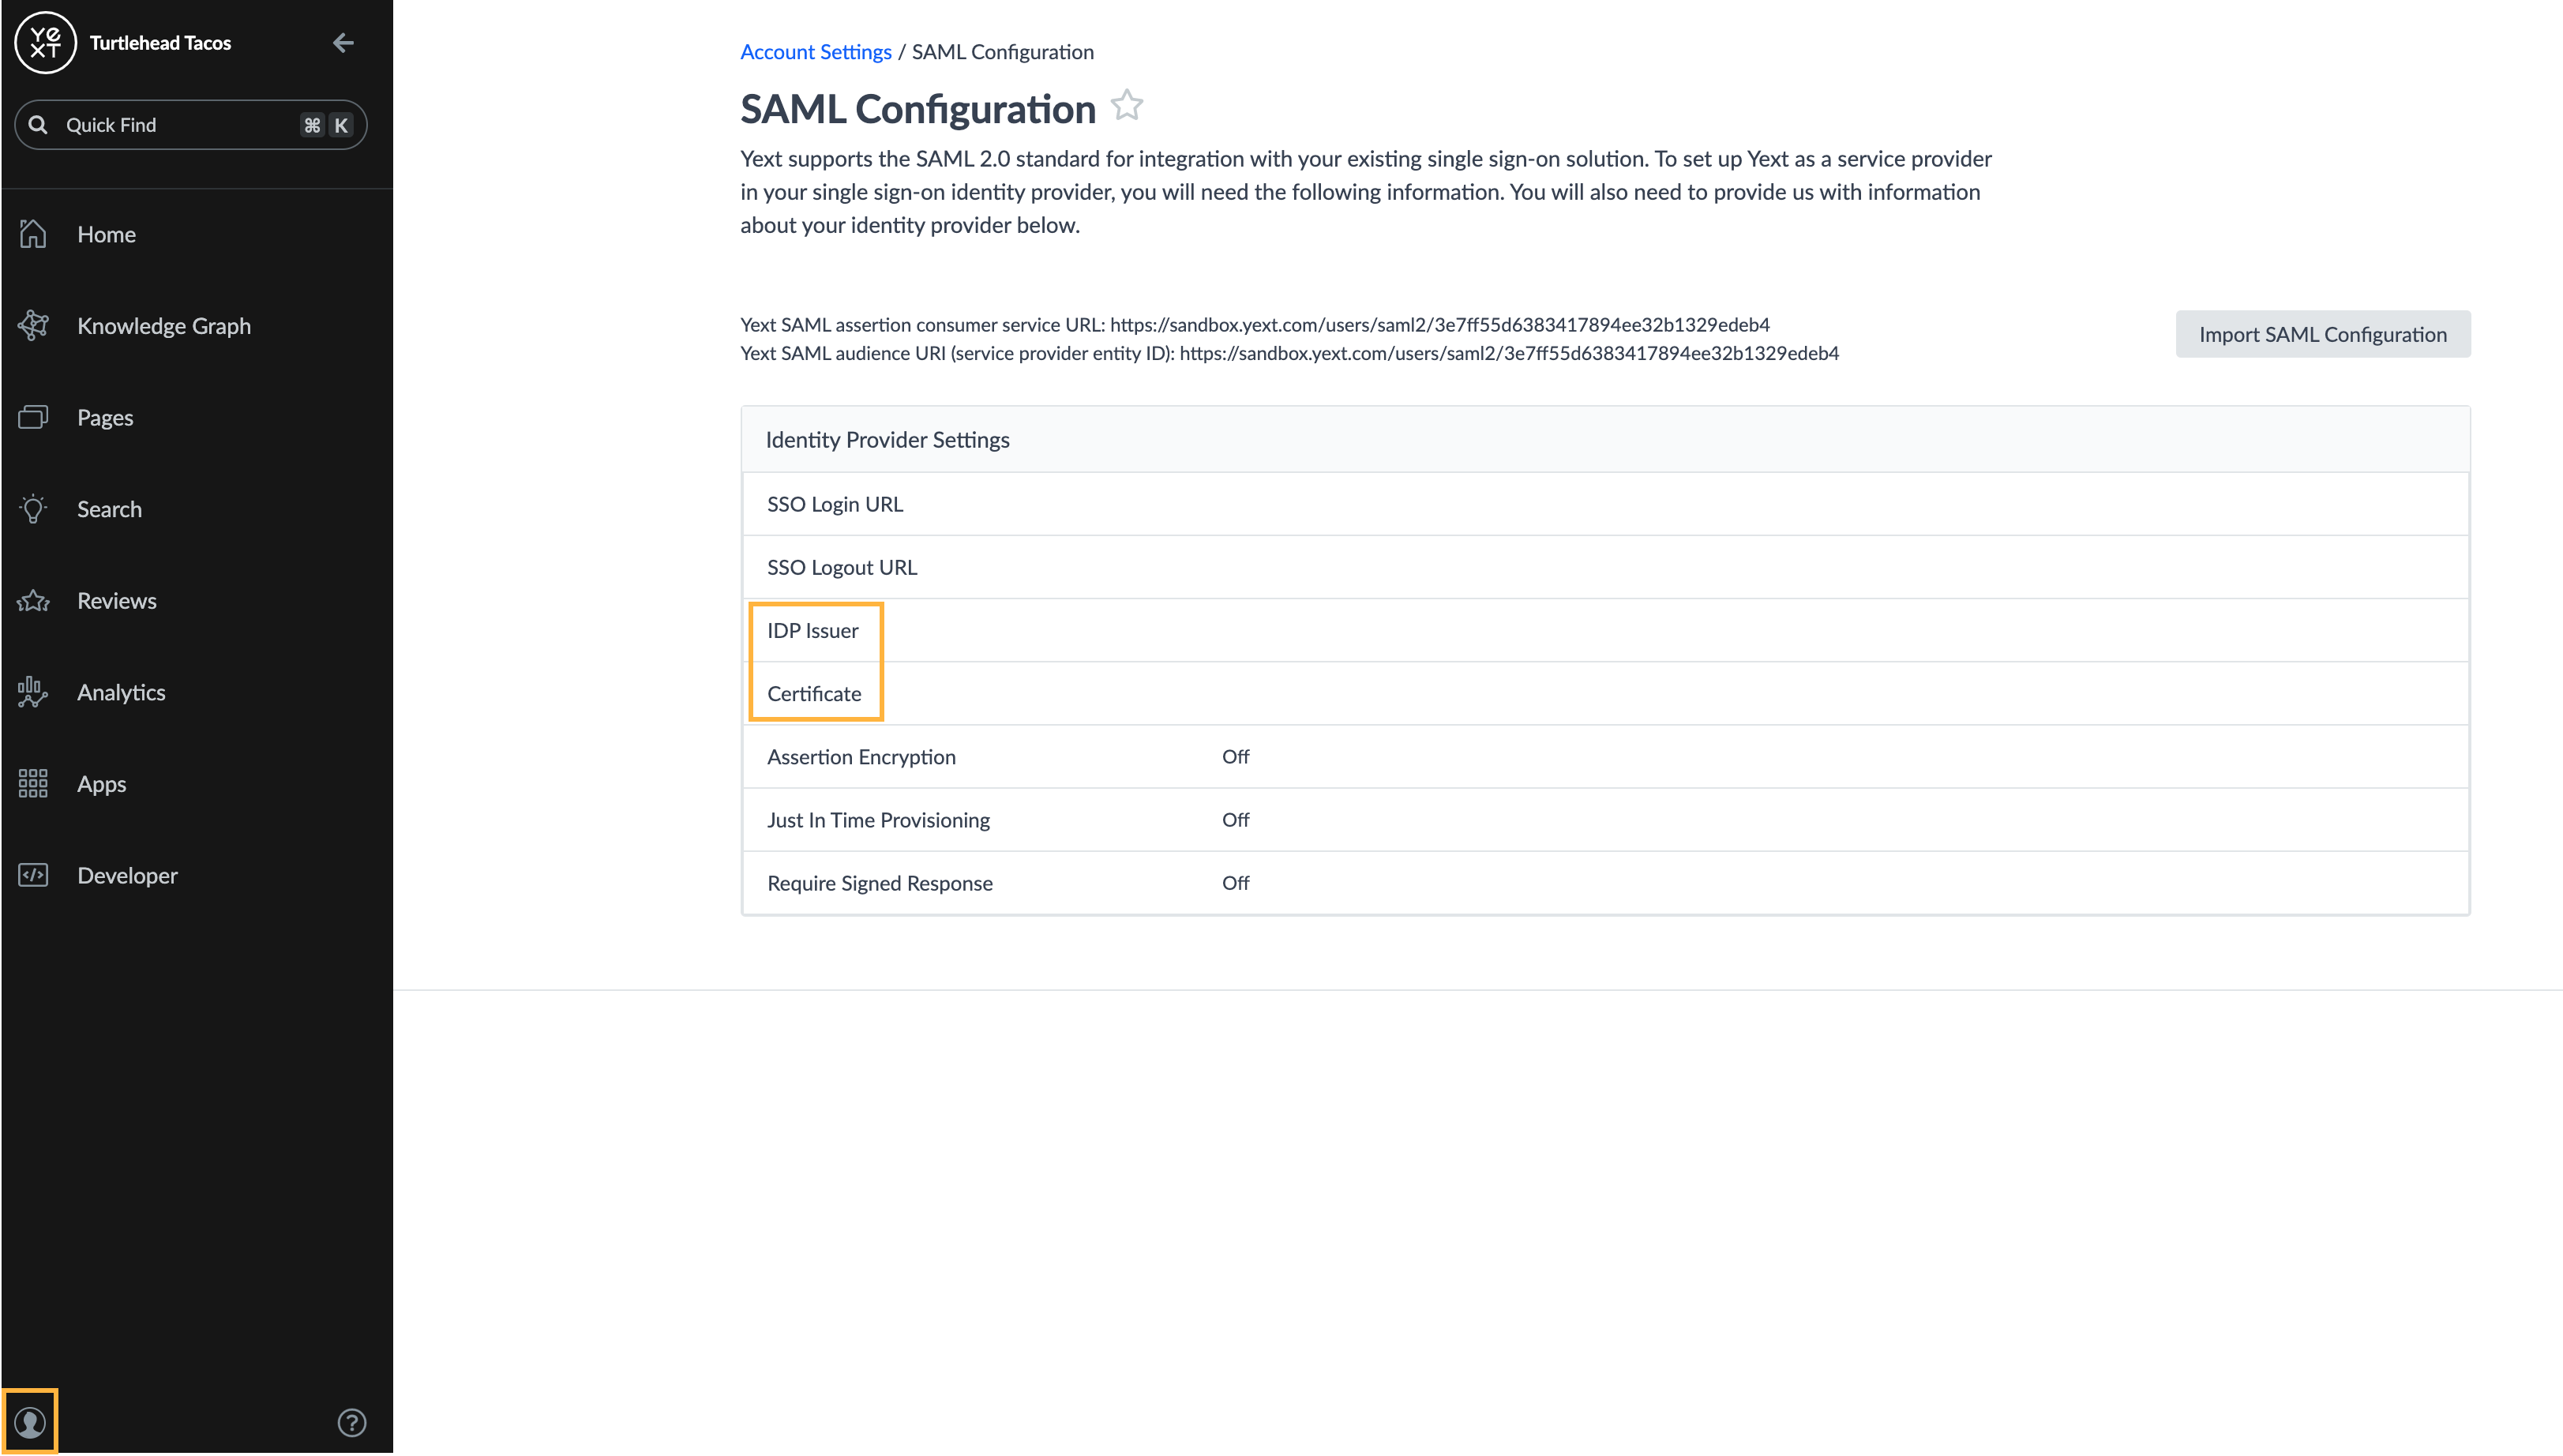 idp issuer and certification fields